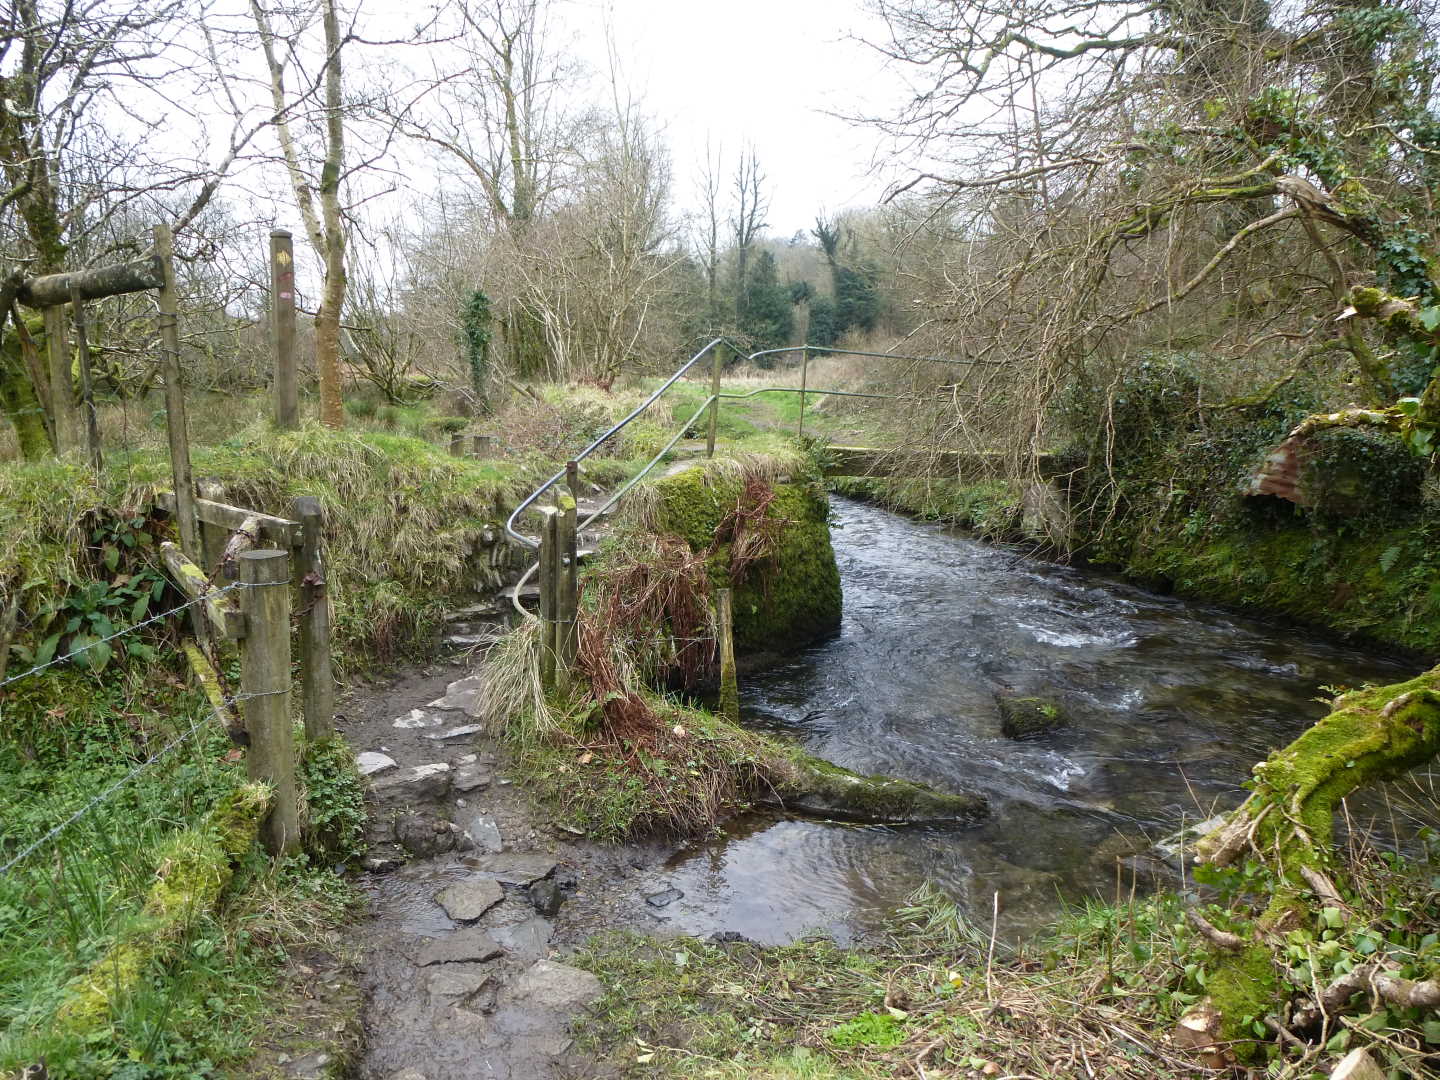 A small bridge over the river covered in moss